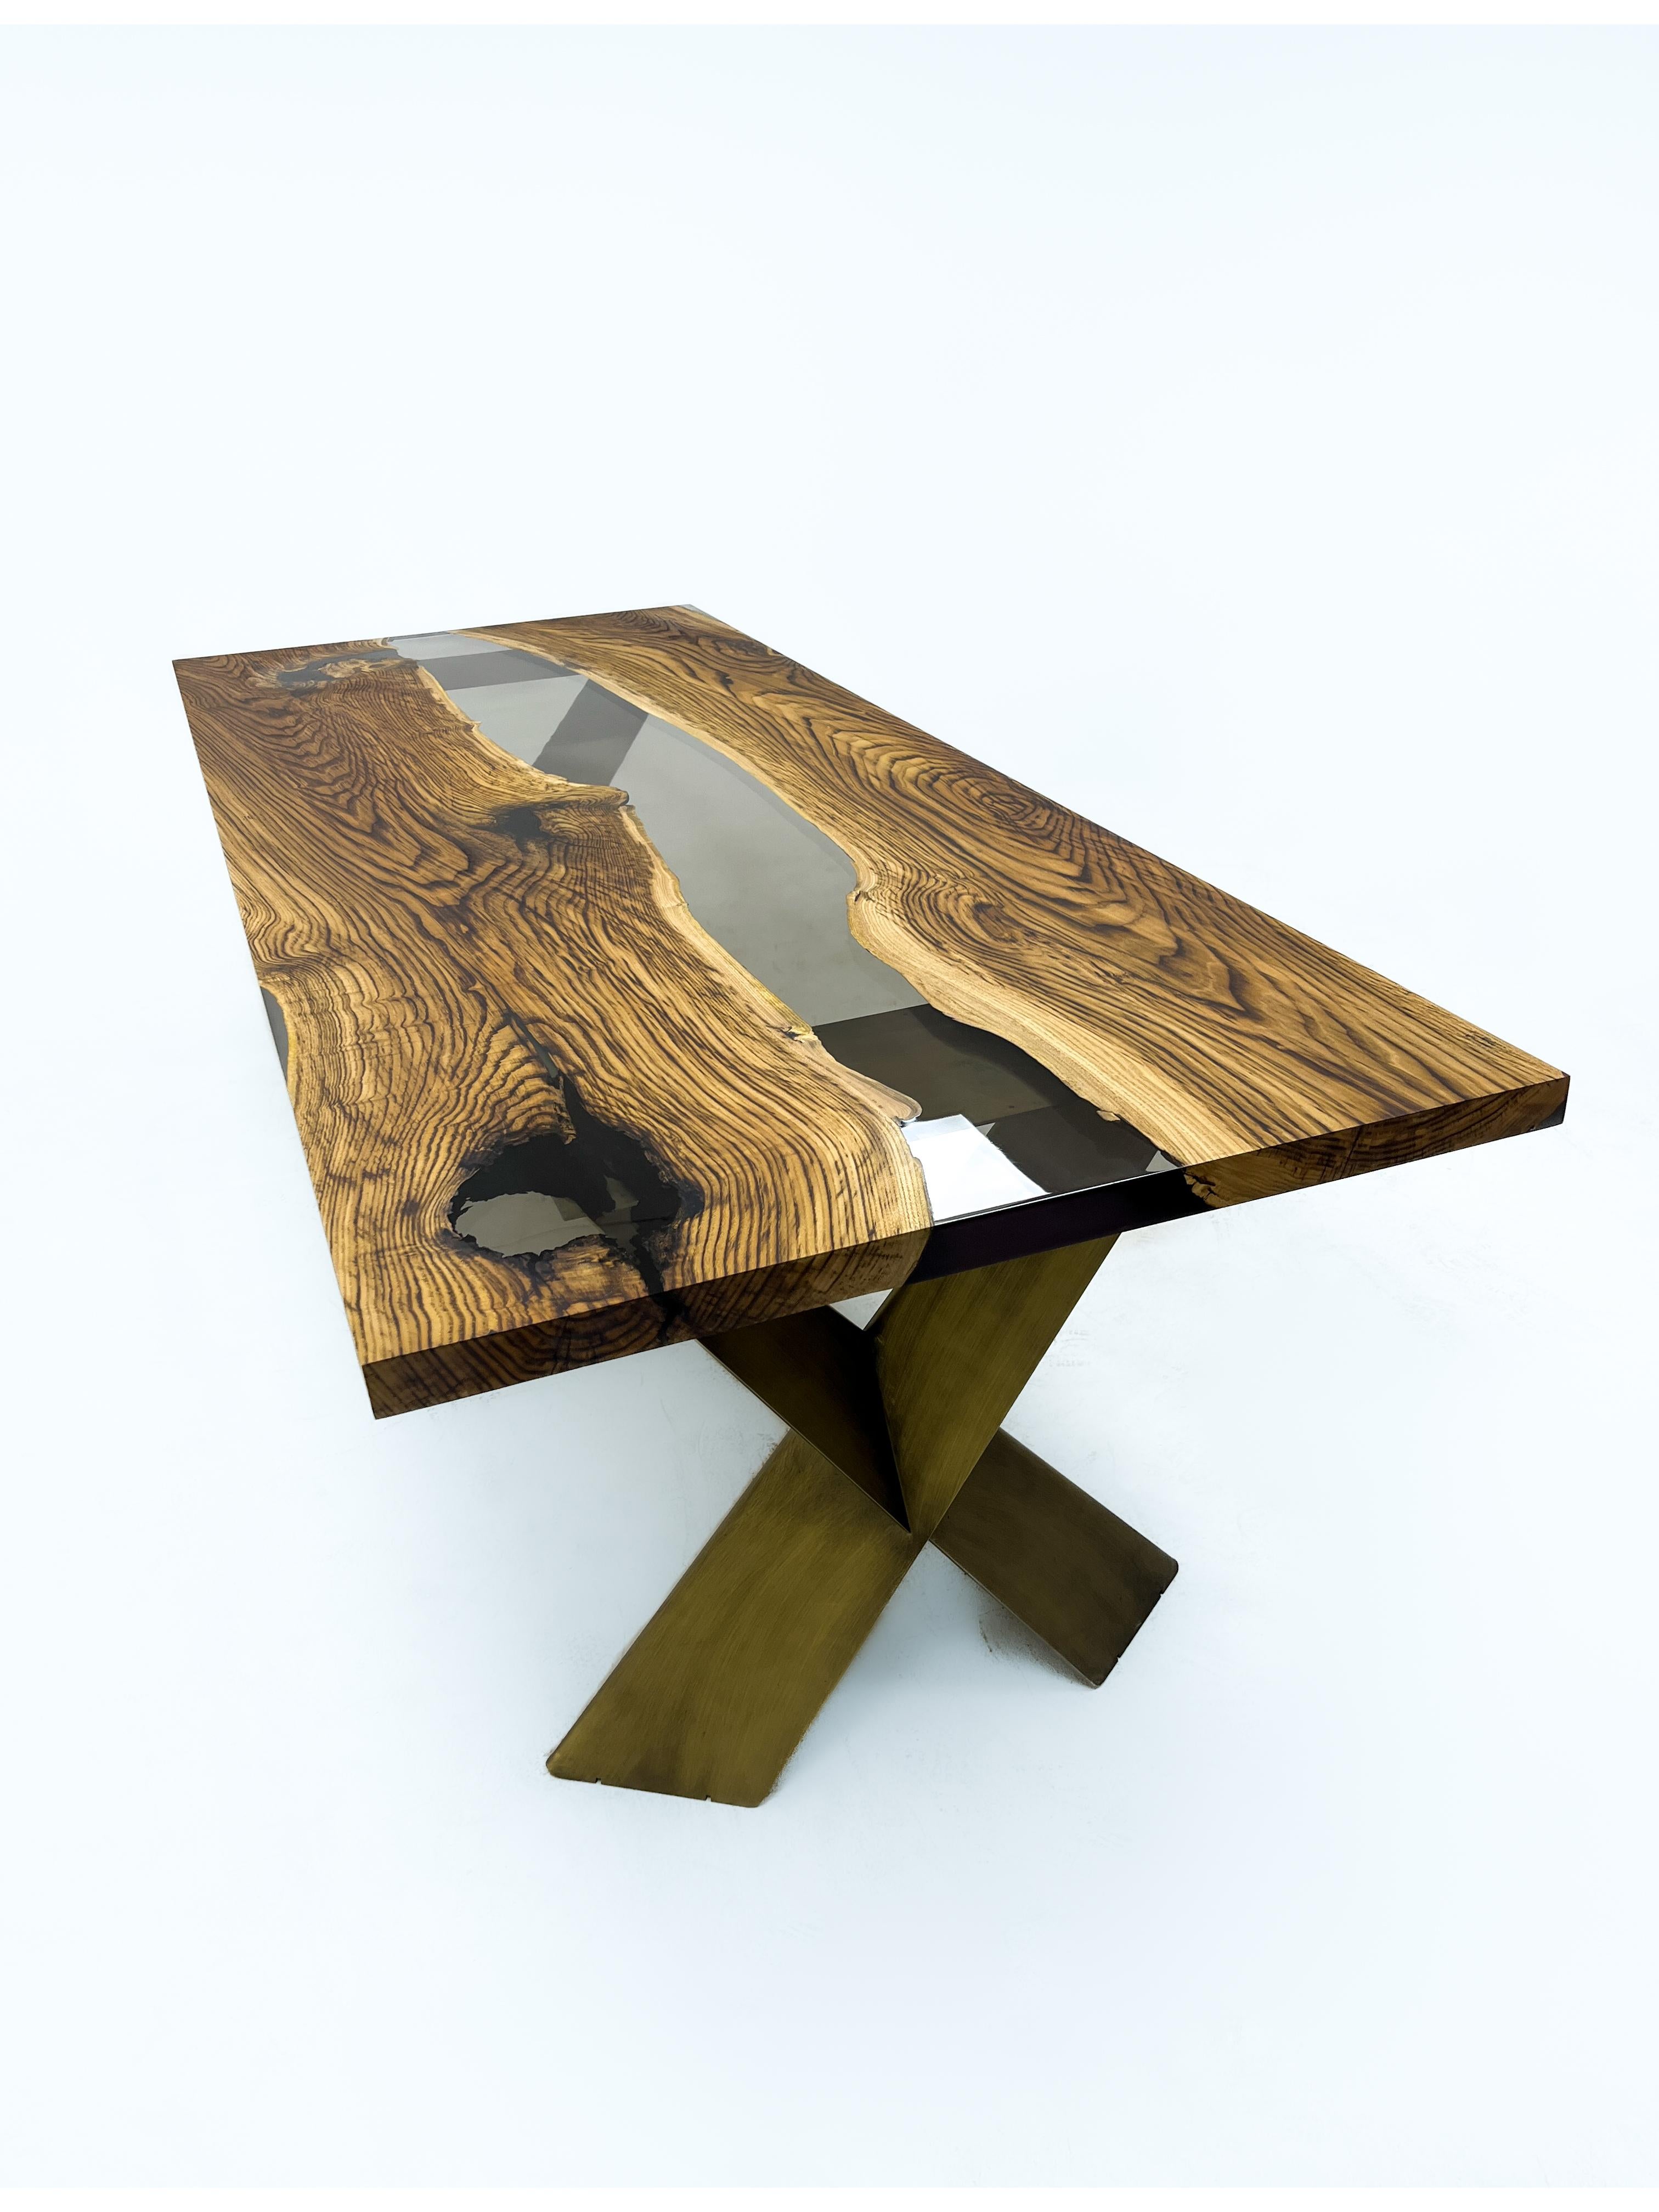 Chestnut Custom Clear Epoxy Resin Dining Table 

This table is made of 500 years old Chestnut Wood. The grains and texture of the wood describe what a natural walnut woods looks like.
It can be used as a dining table or as a conference table.